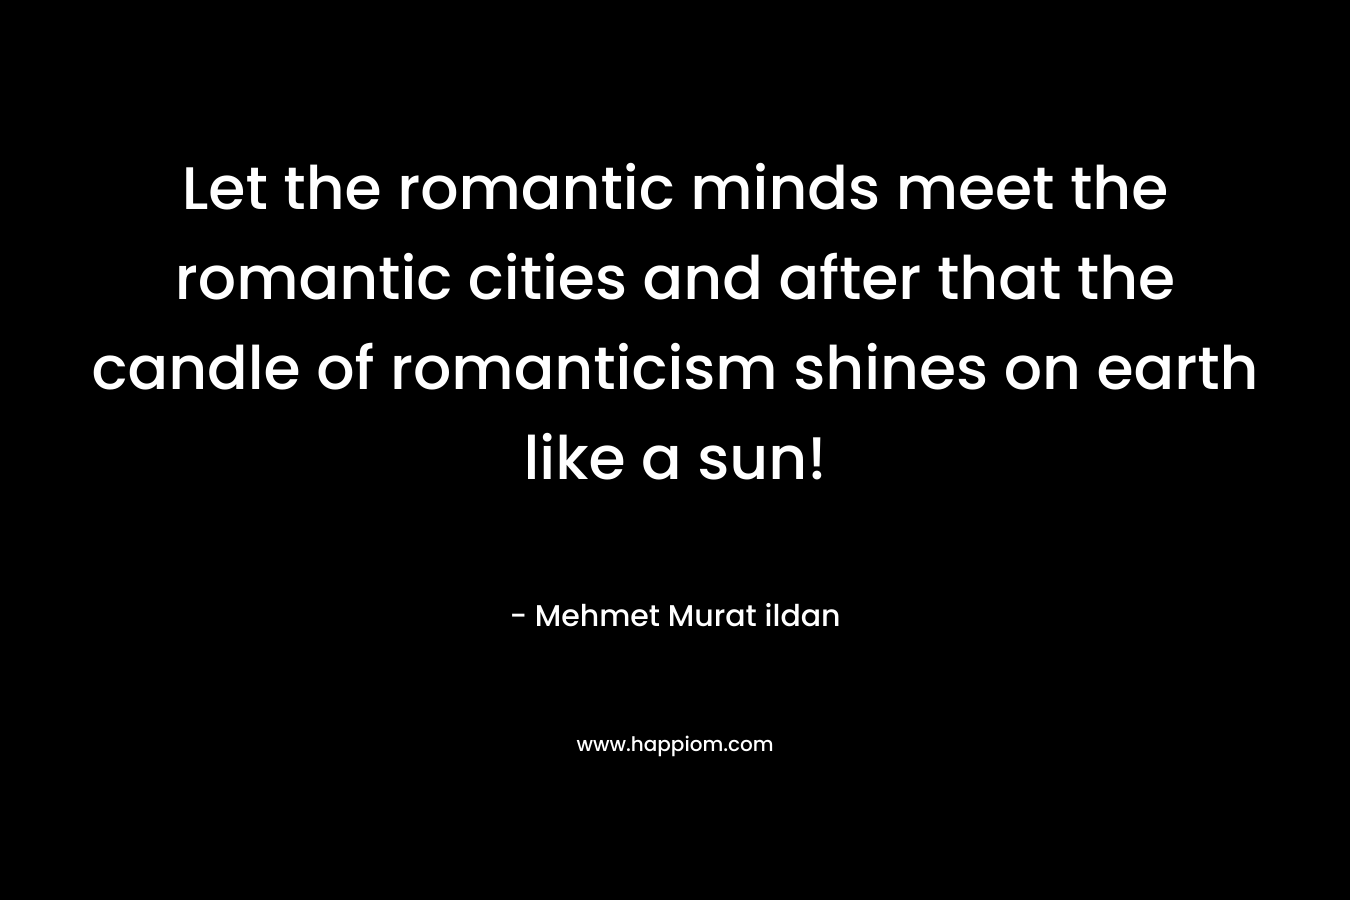 Let the romantic minds meet the romantic cities and after that the candle of romanticism shines on earth like a sun!